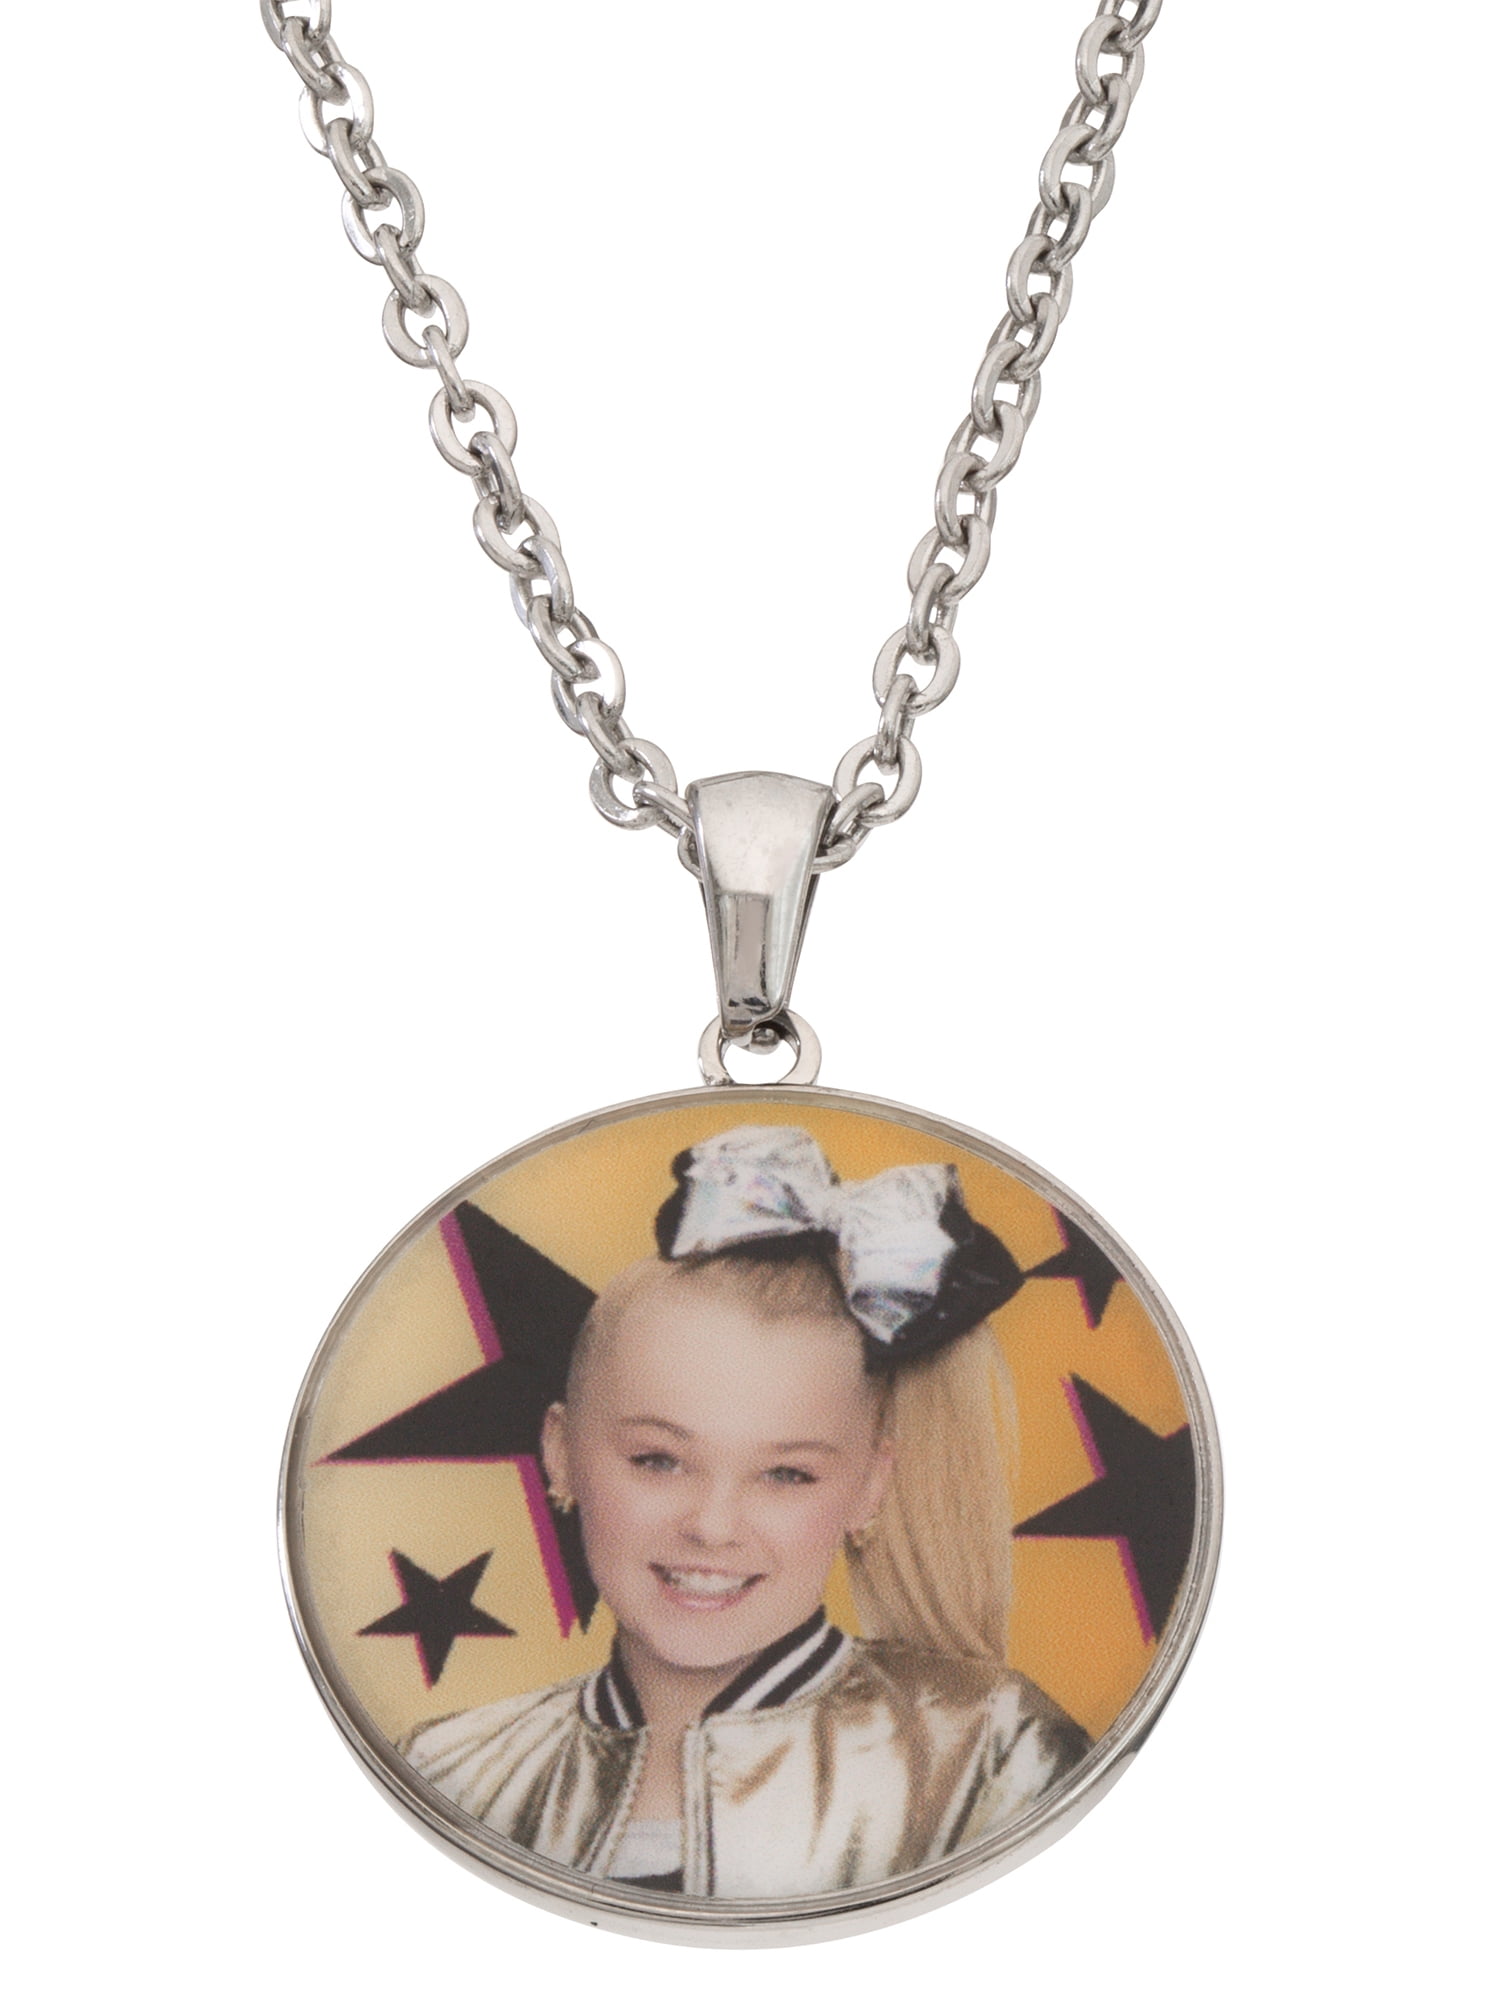 JoJo Siwa Squishy Unicorn Necklace Activity Set - The Party Place - Conway